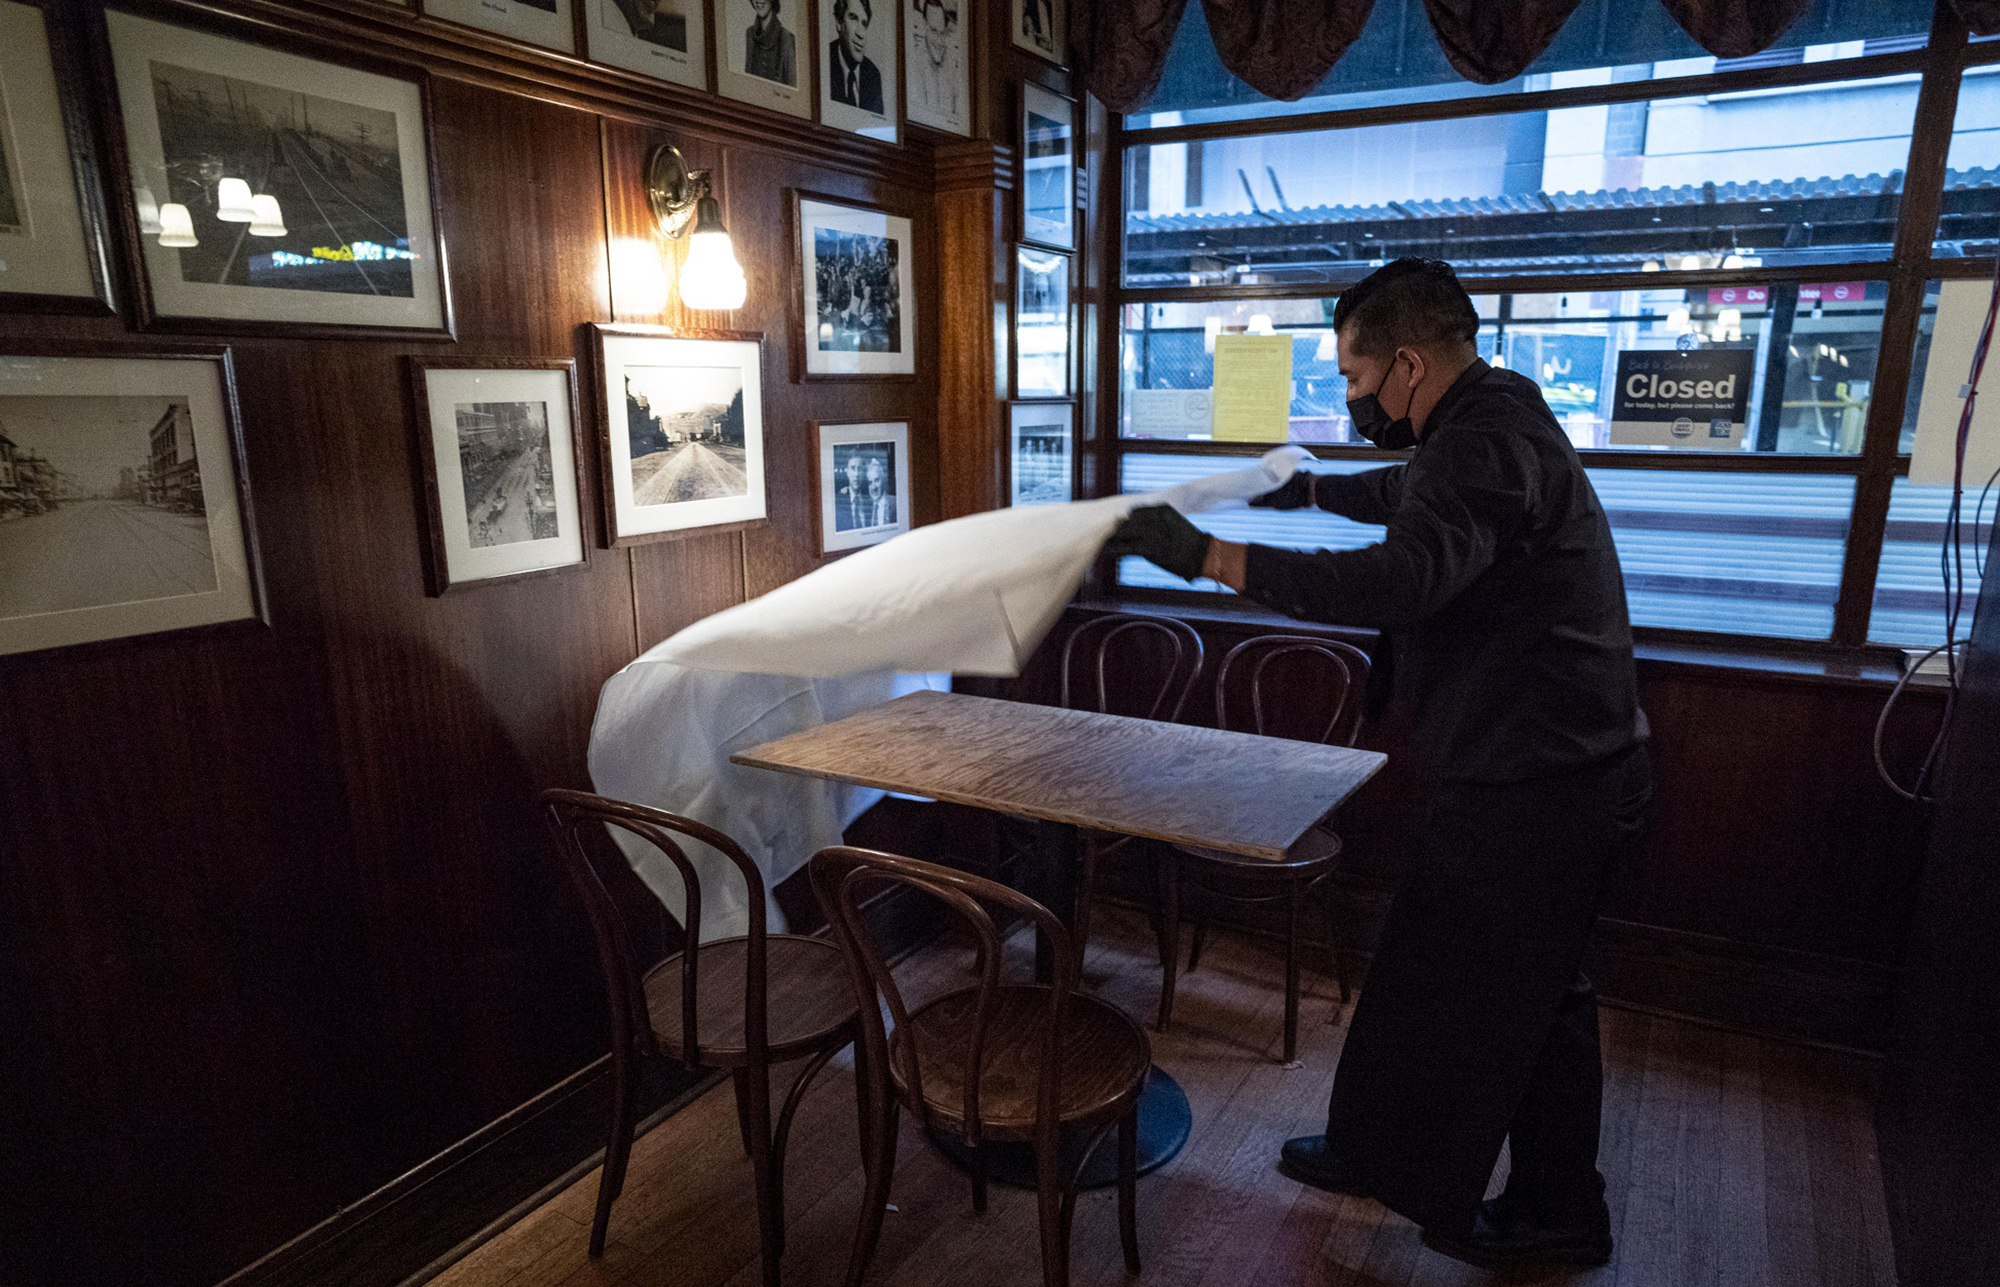 A worker puts down a table cloth at a restaurant in San Francisco.